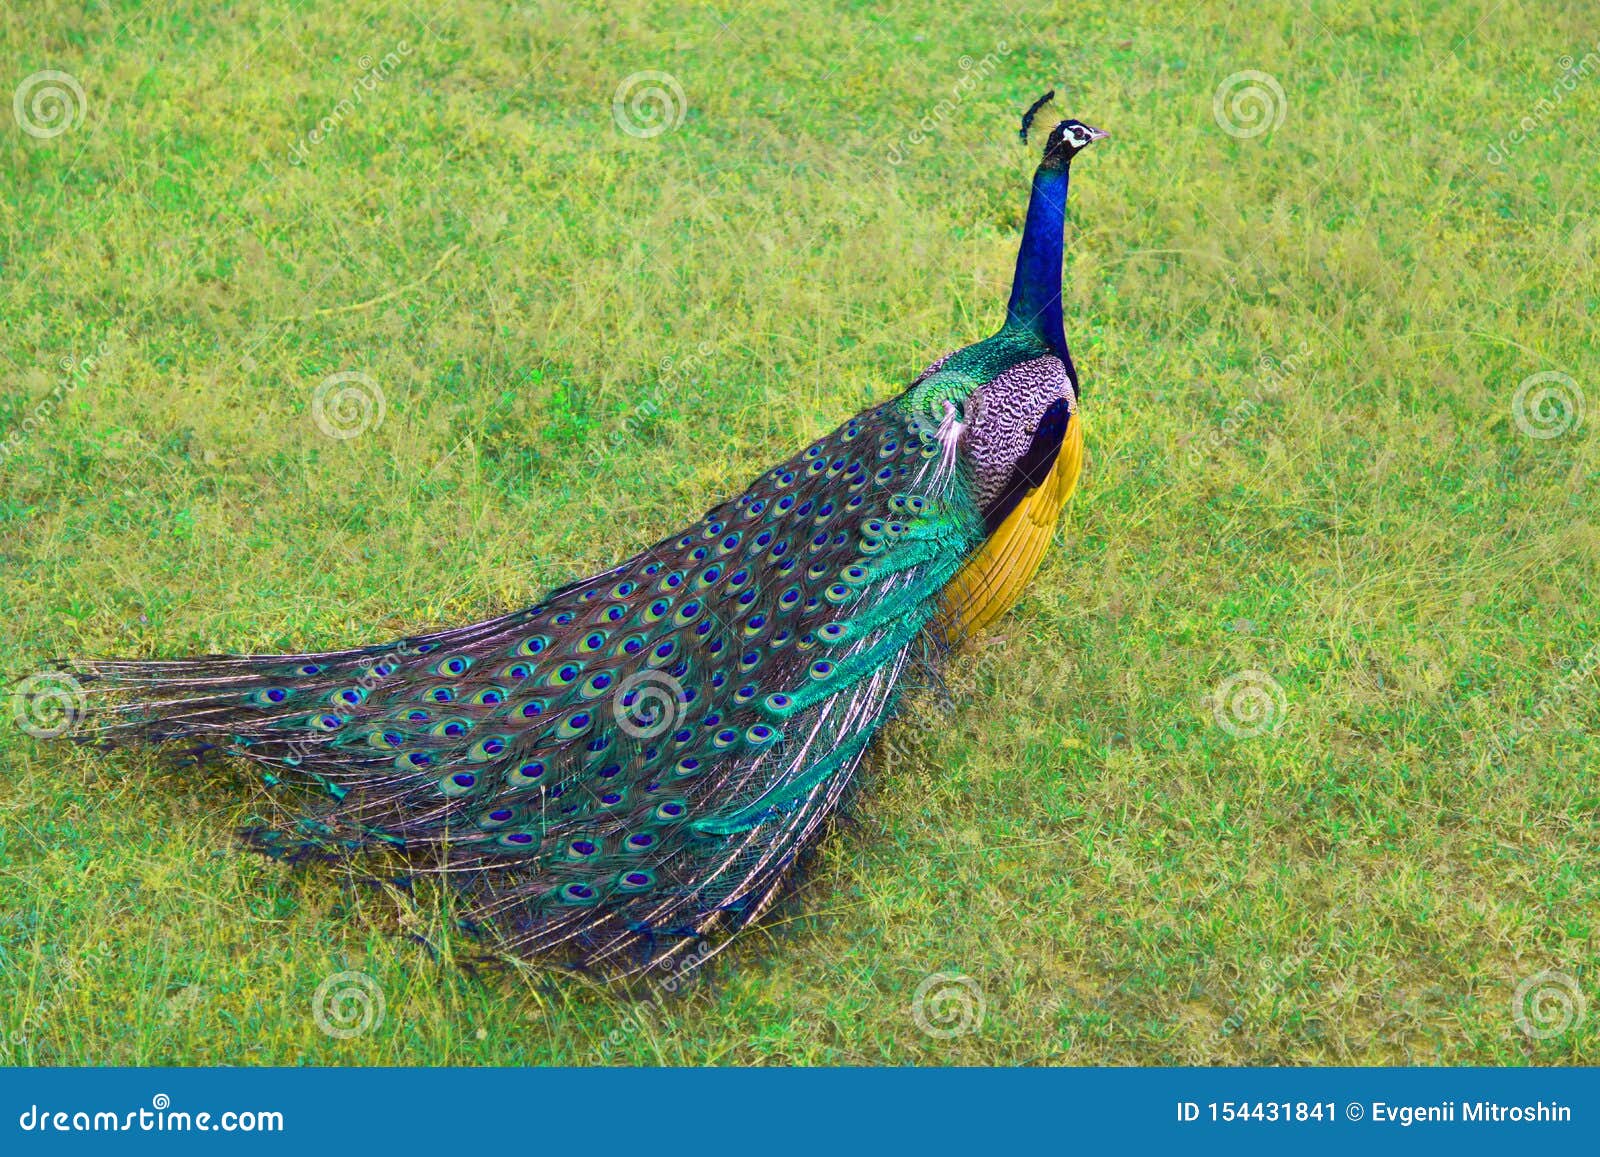 Beautiful Peacock with Open Tail, in Natural Habitat Stock Image ...